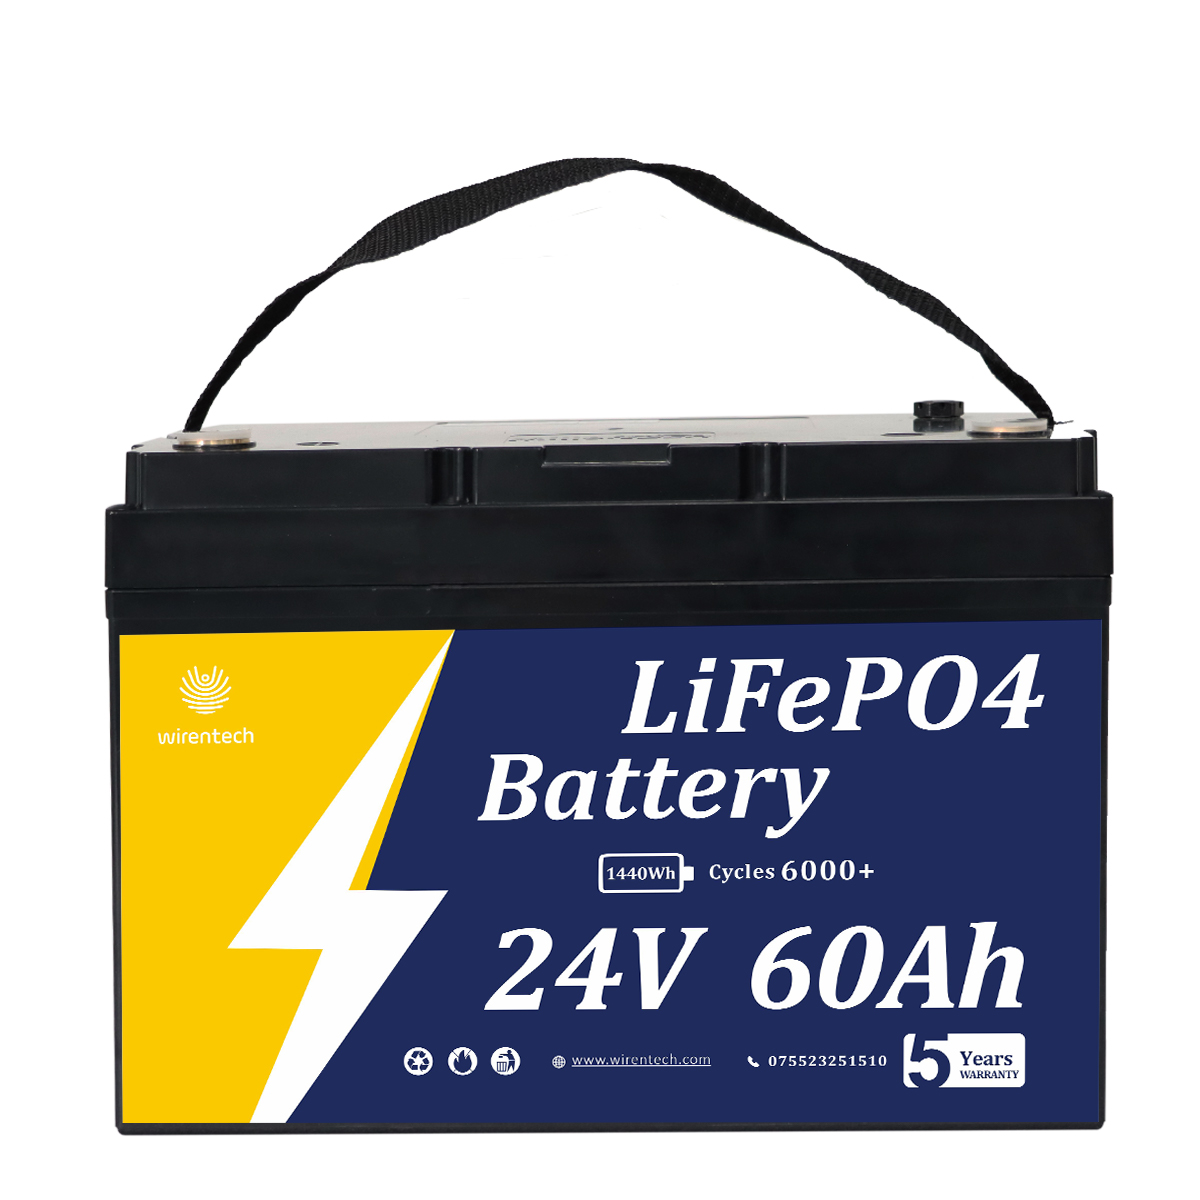 24V 60Ah Atmospheric Vent Environmentally Friendly More Intelligent Bluetooth Robust Communications Starting Battery High Performance Lithium Battery